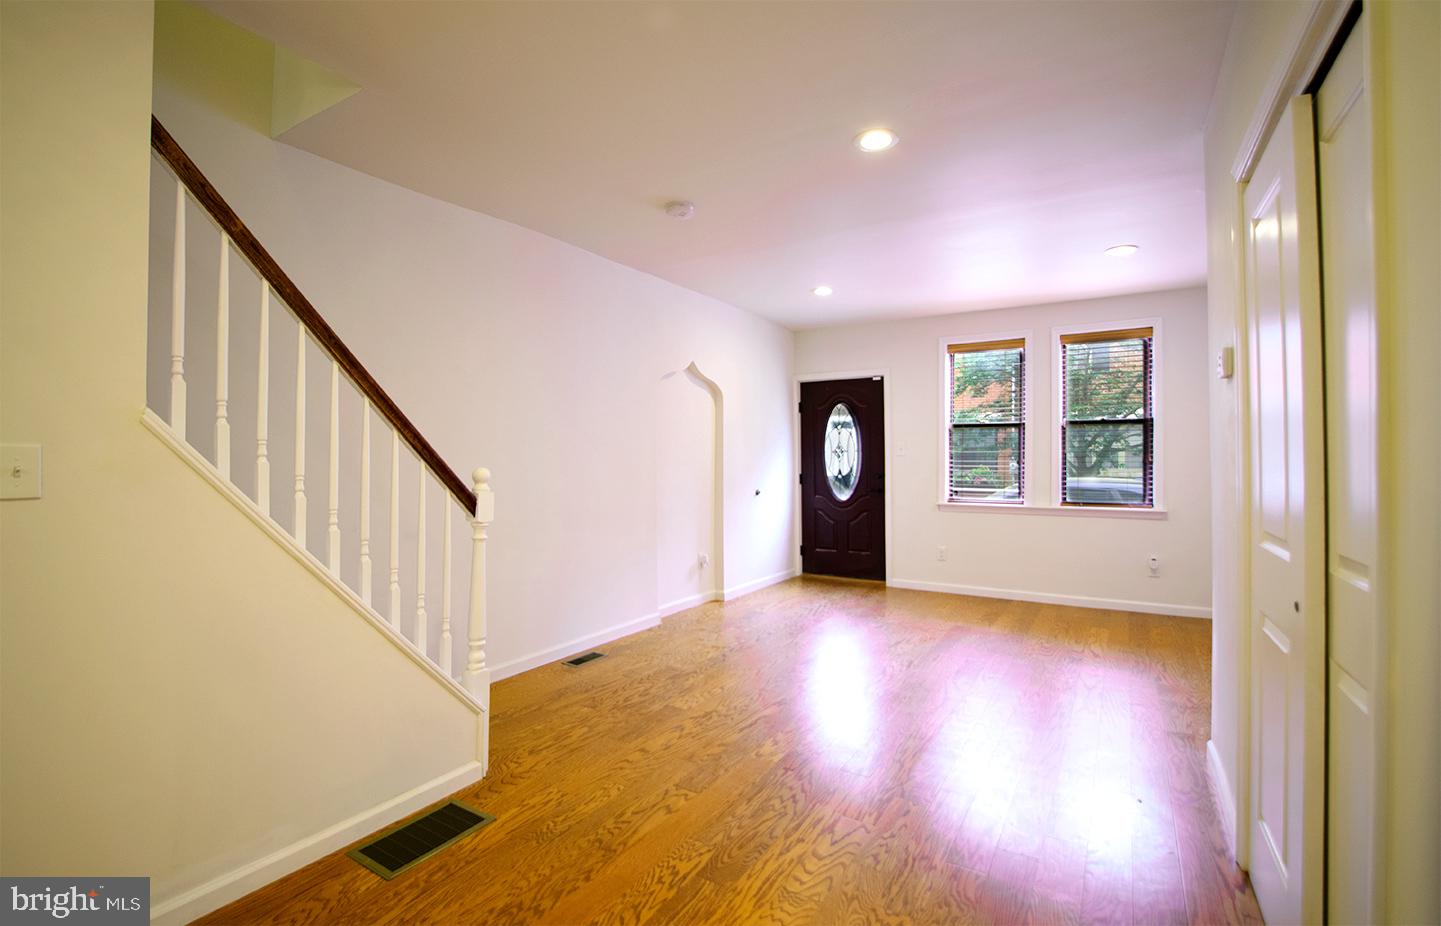 a view of an empty room with wooden floor and stairs